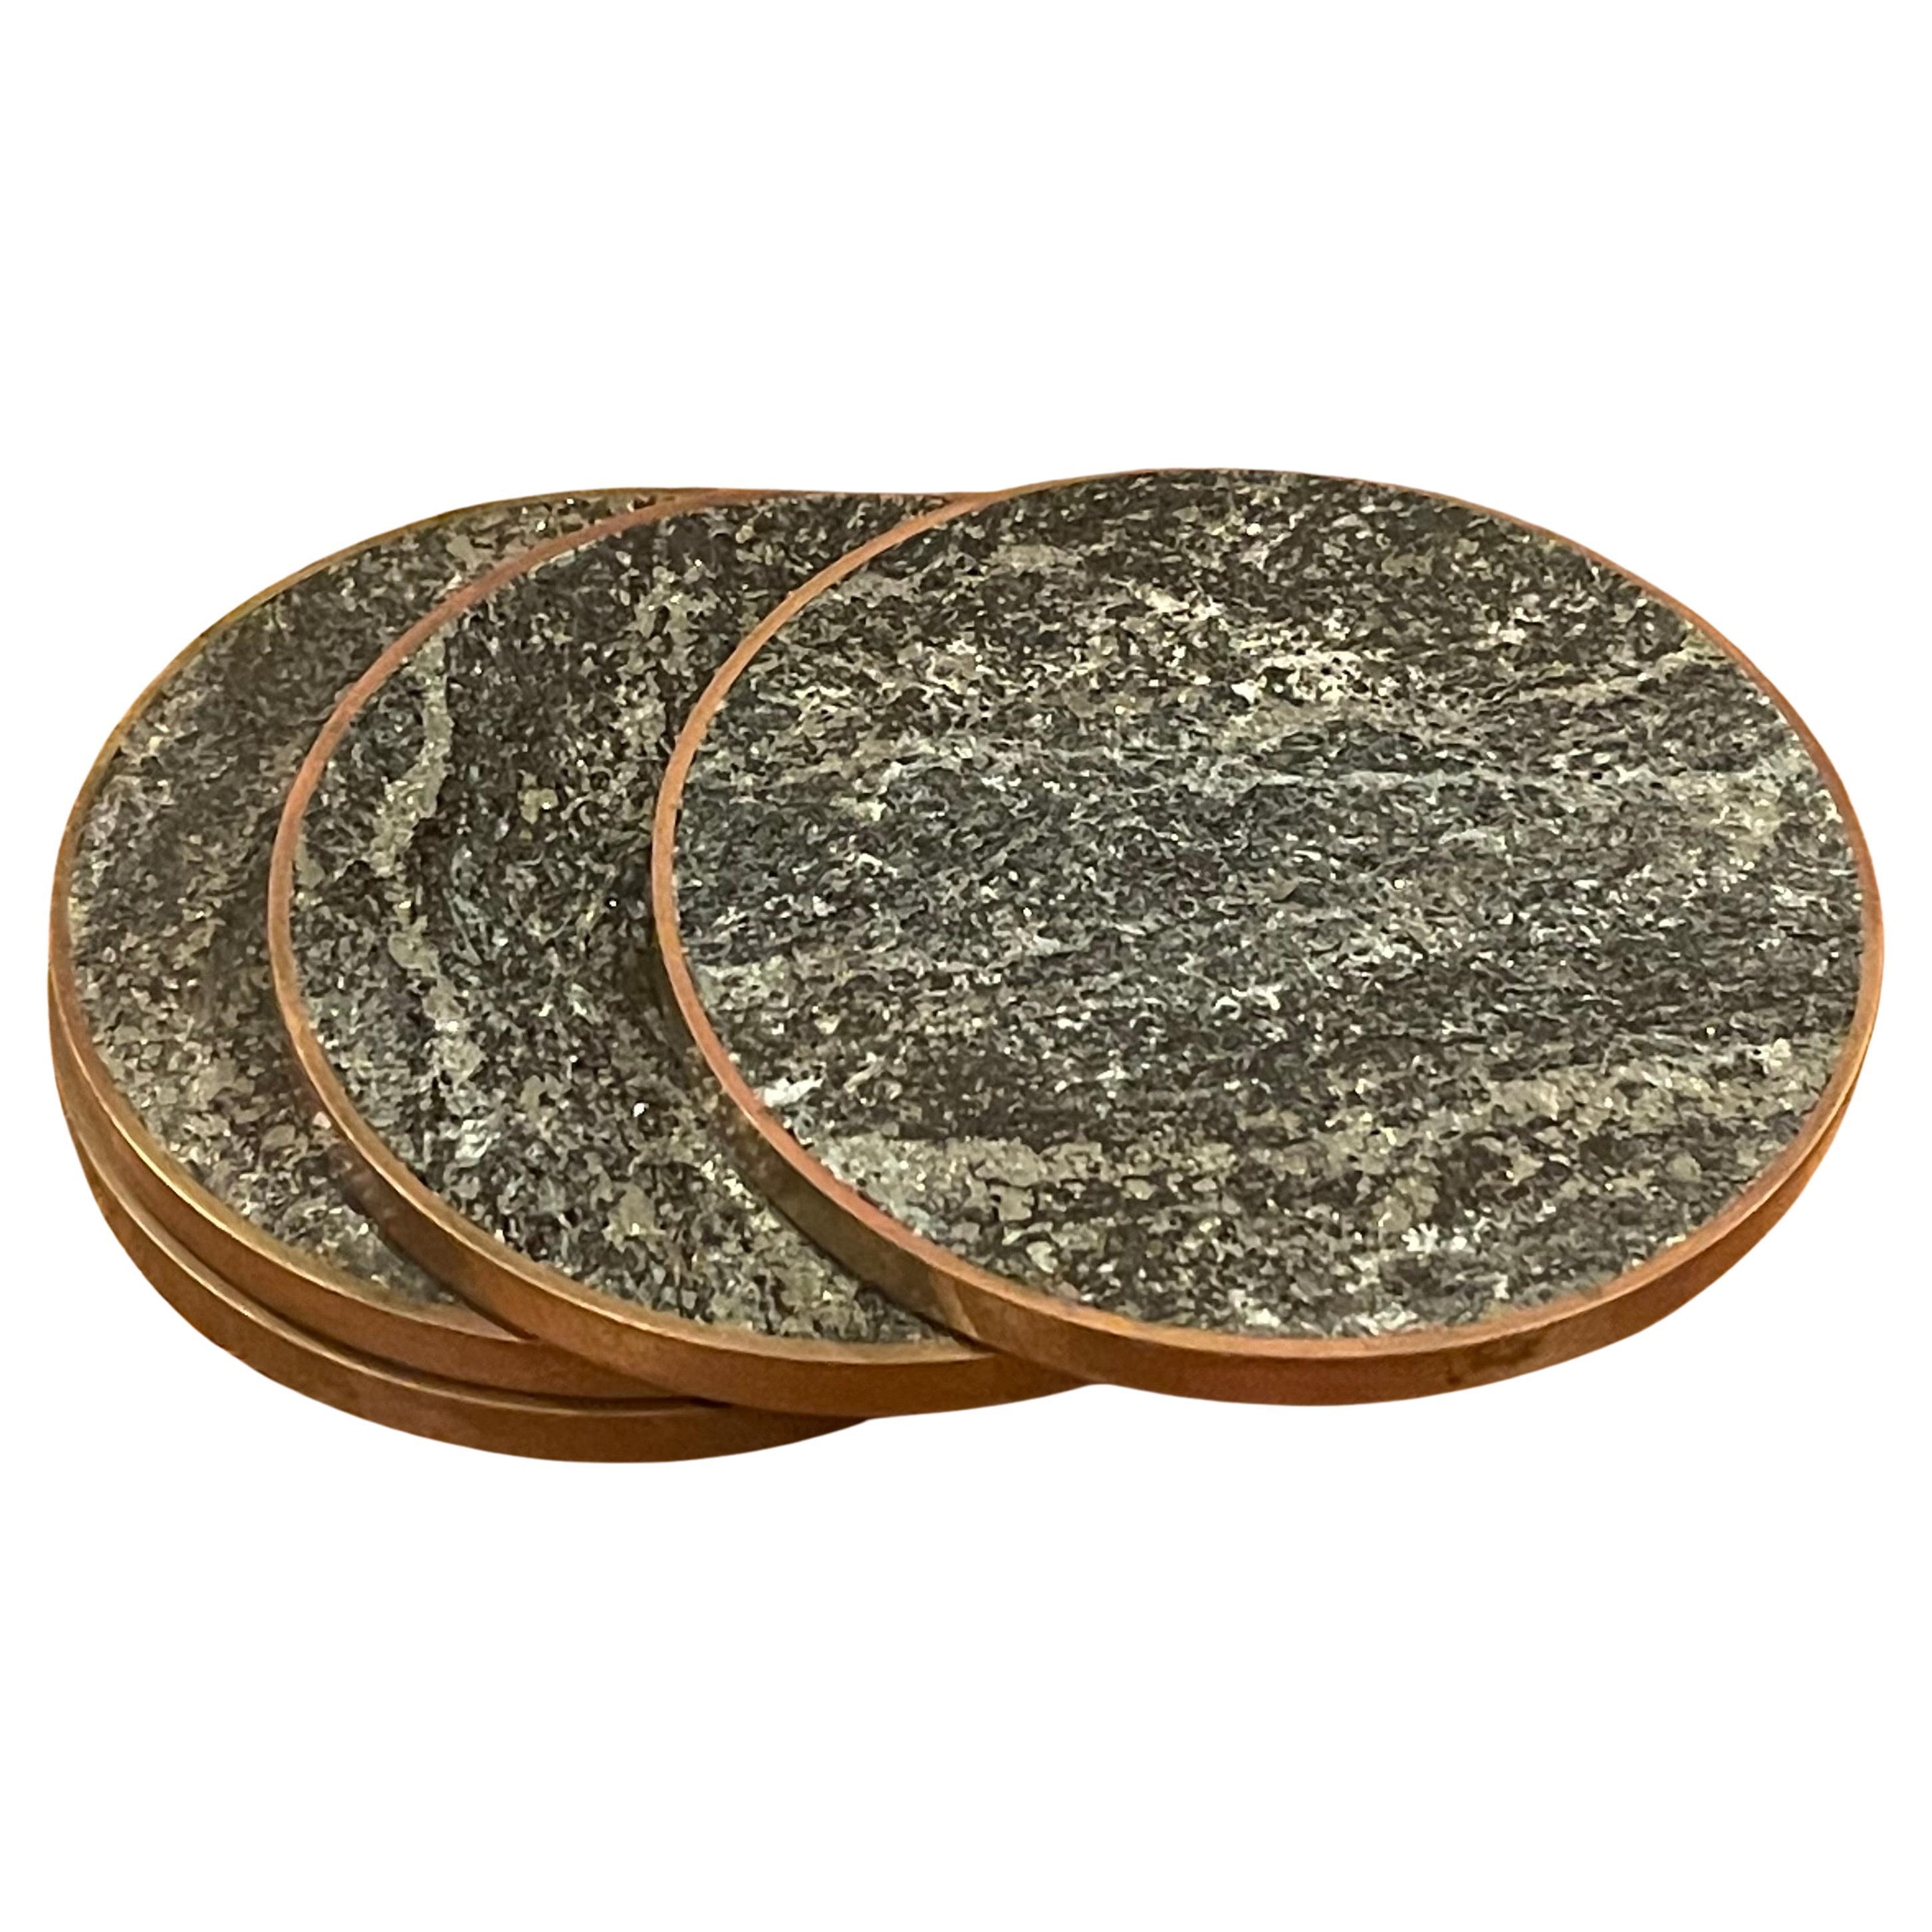 Set of 4 MCM Brass and Marble Coasters by Saulo for Sulitjelma Stein Og Metall For Sale